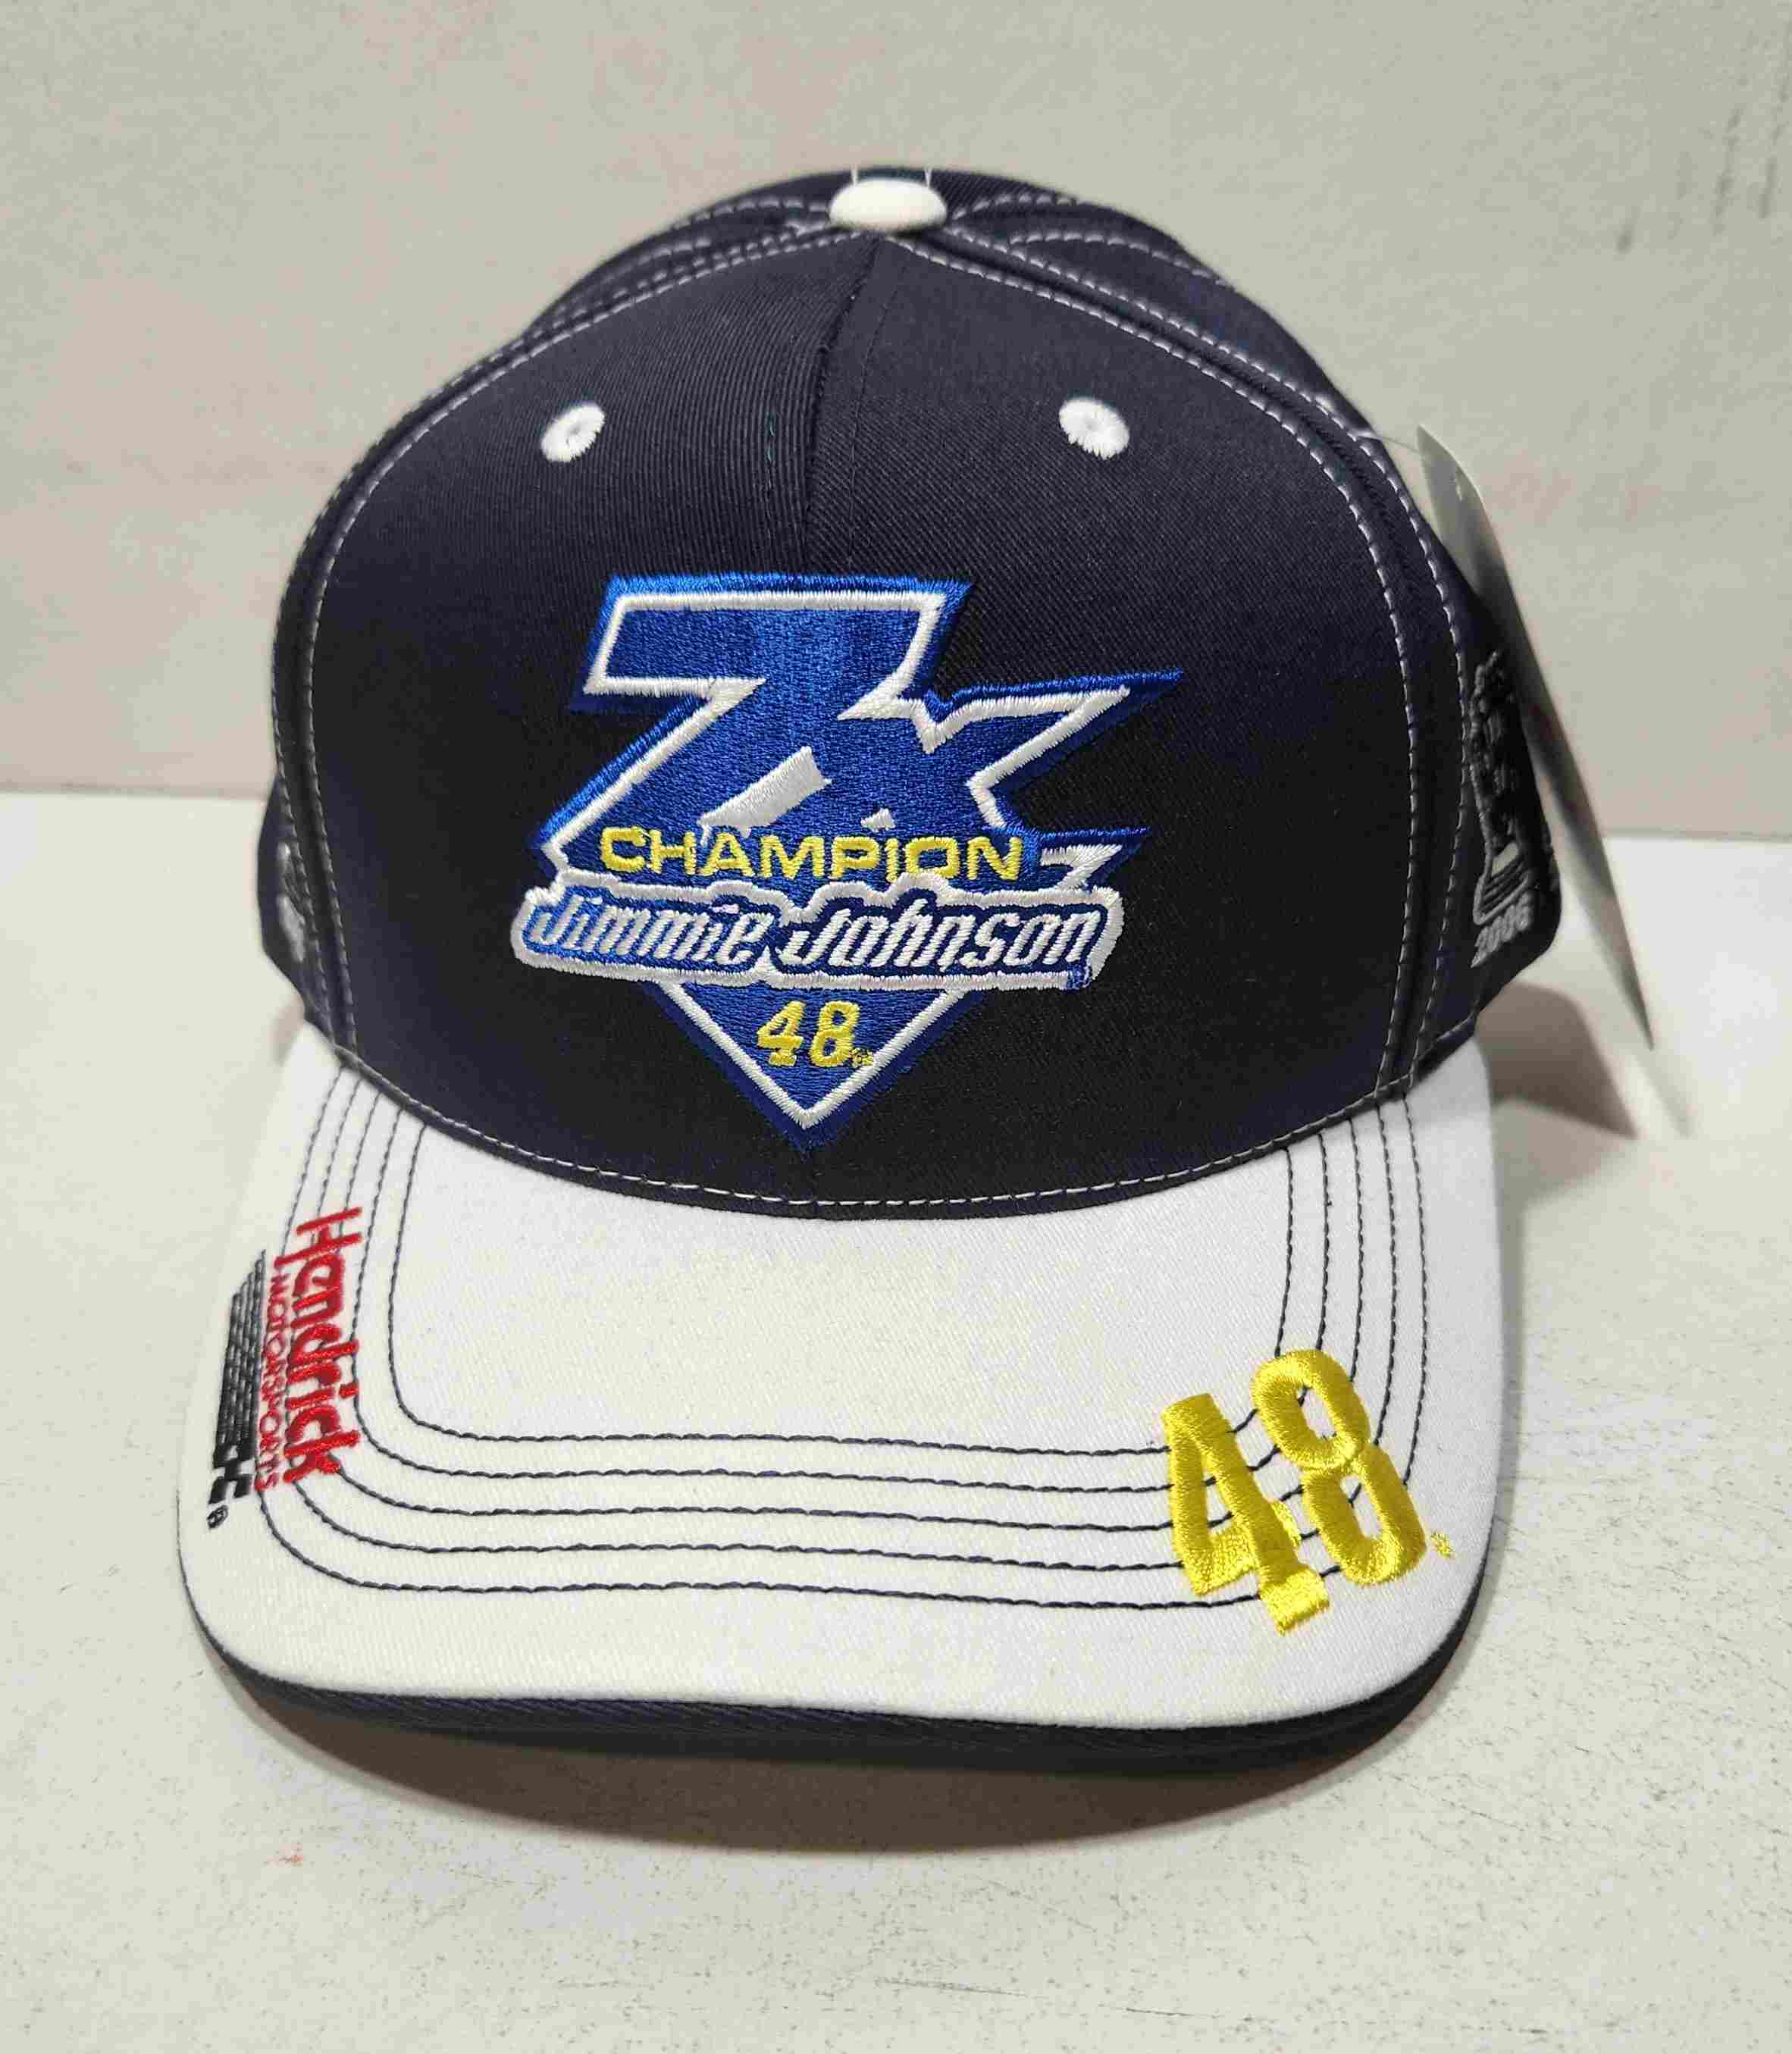 2016 Jimmie Johnson Lowe's "7-Time Champion" Trophy hat